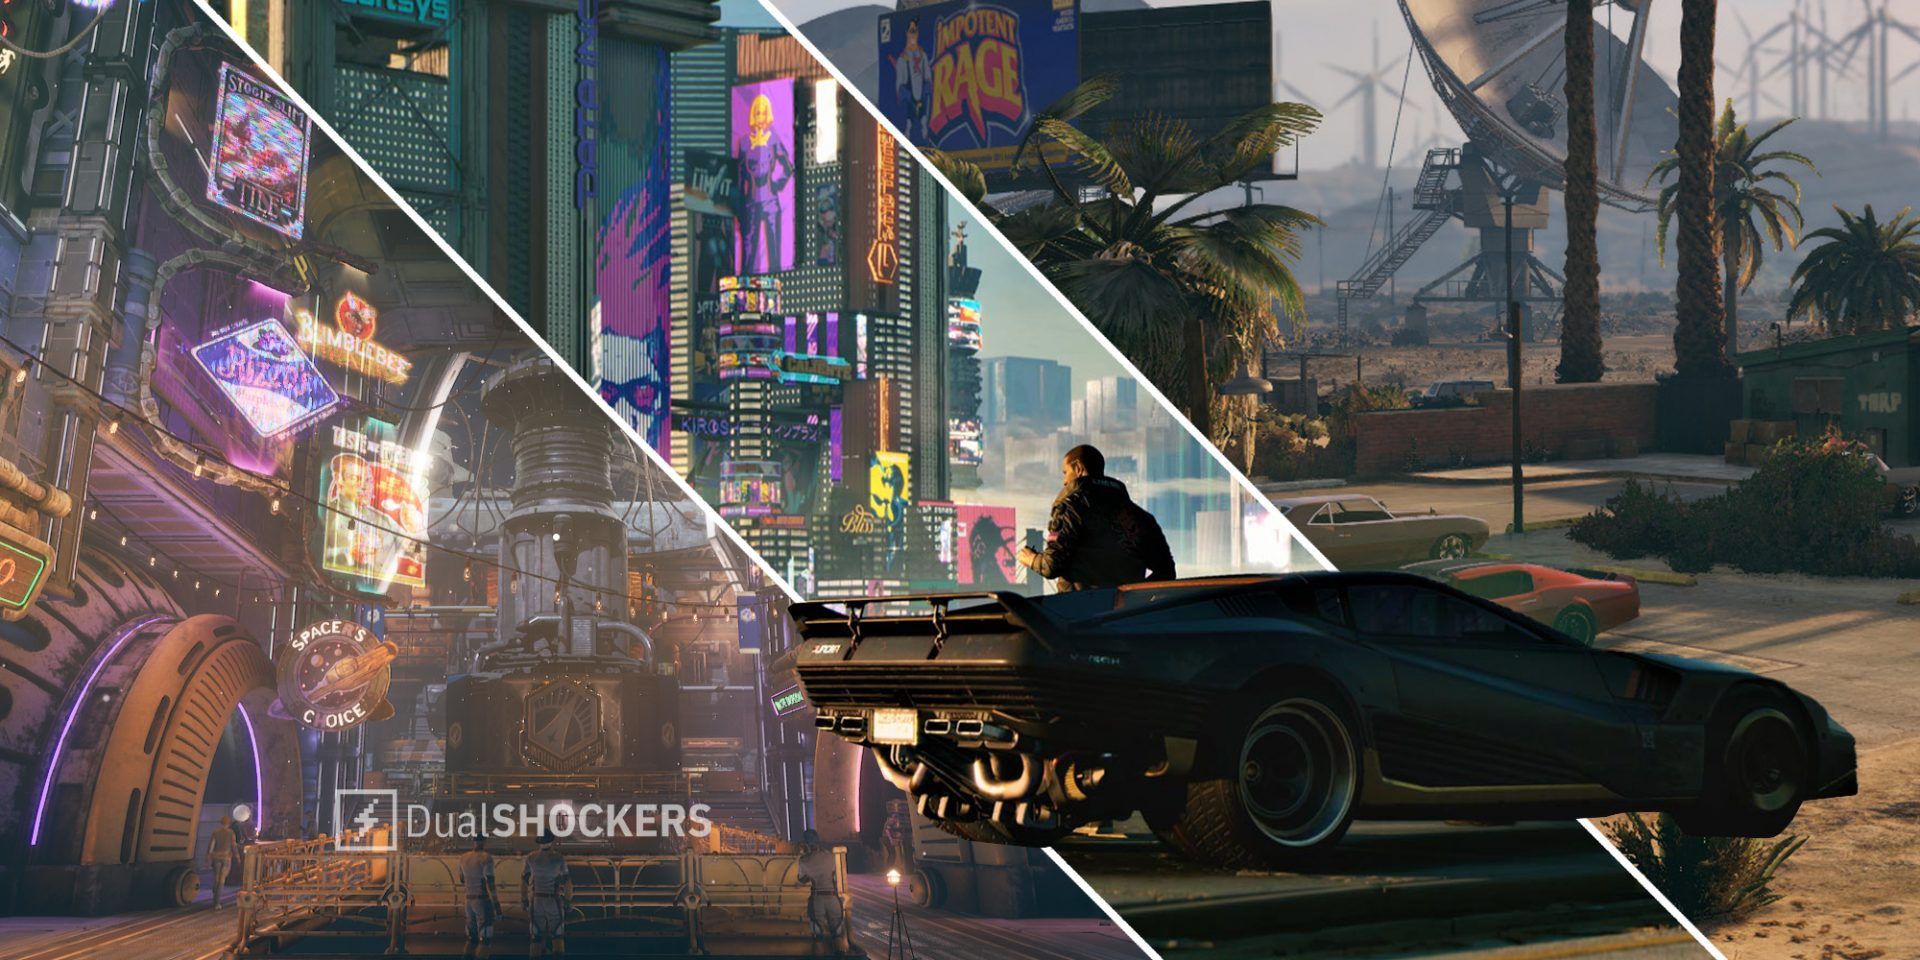 The Outer Worlds advertising on left, Cyberpunk 2077 ads in Night City, Grand Theft Auto 5 billboard on right